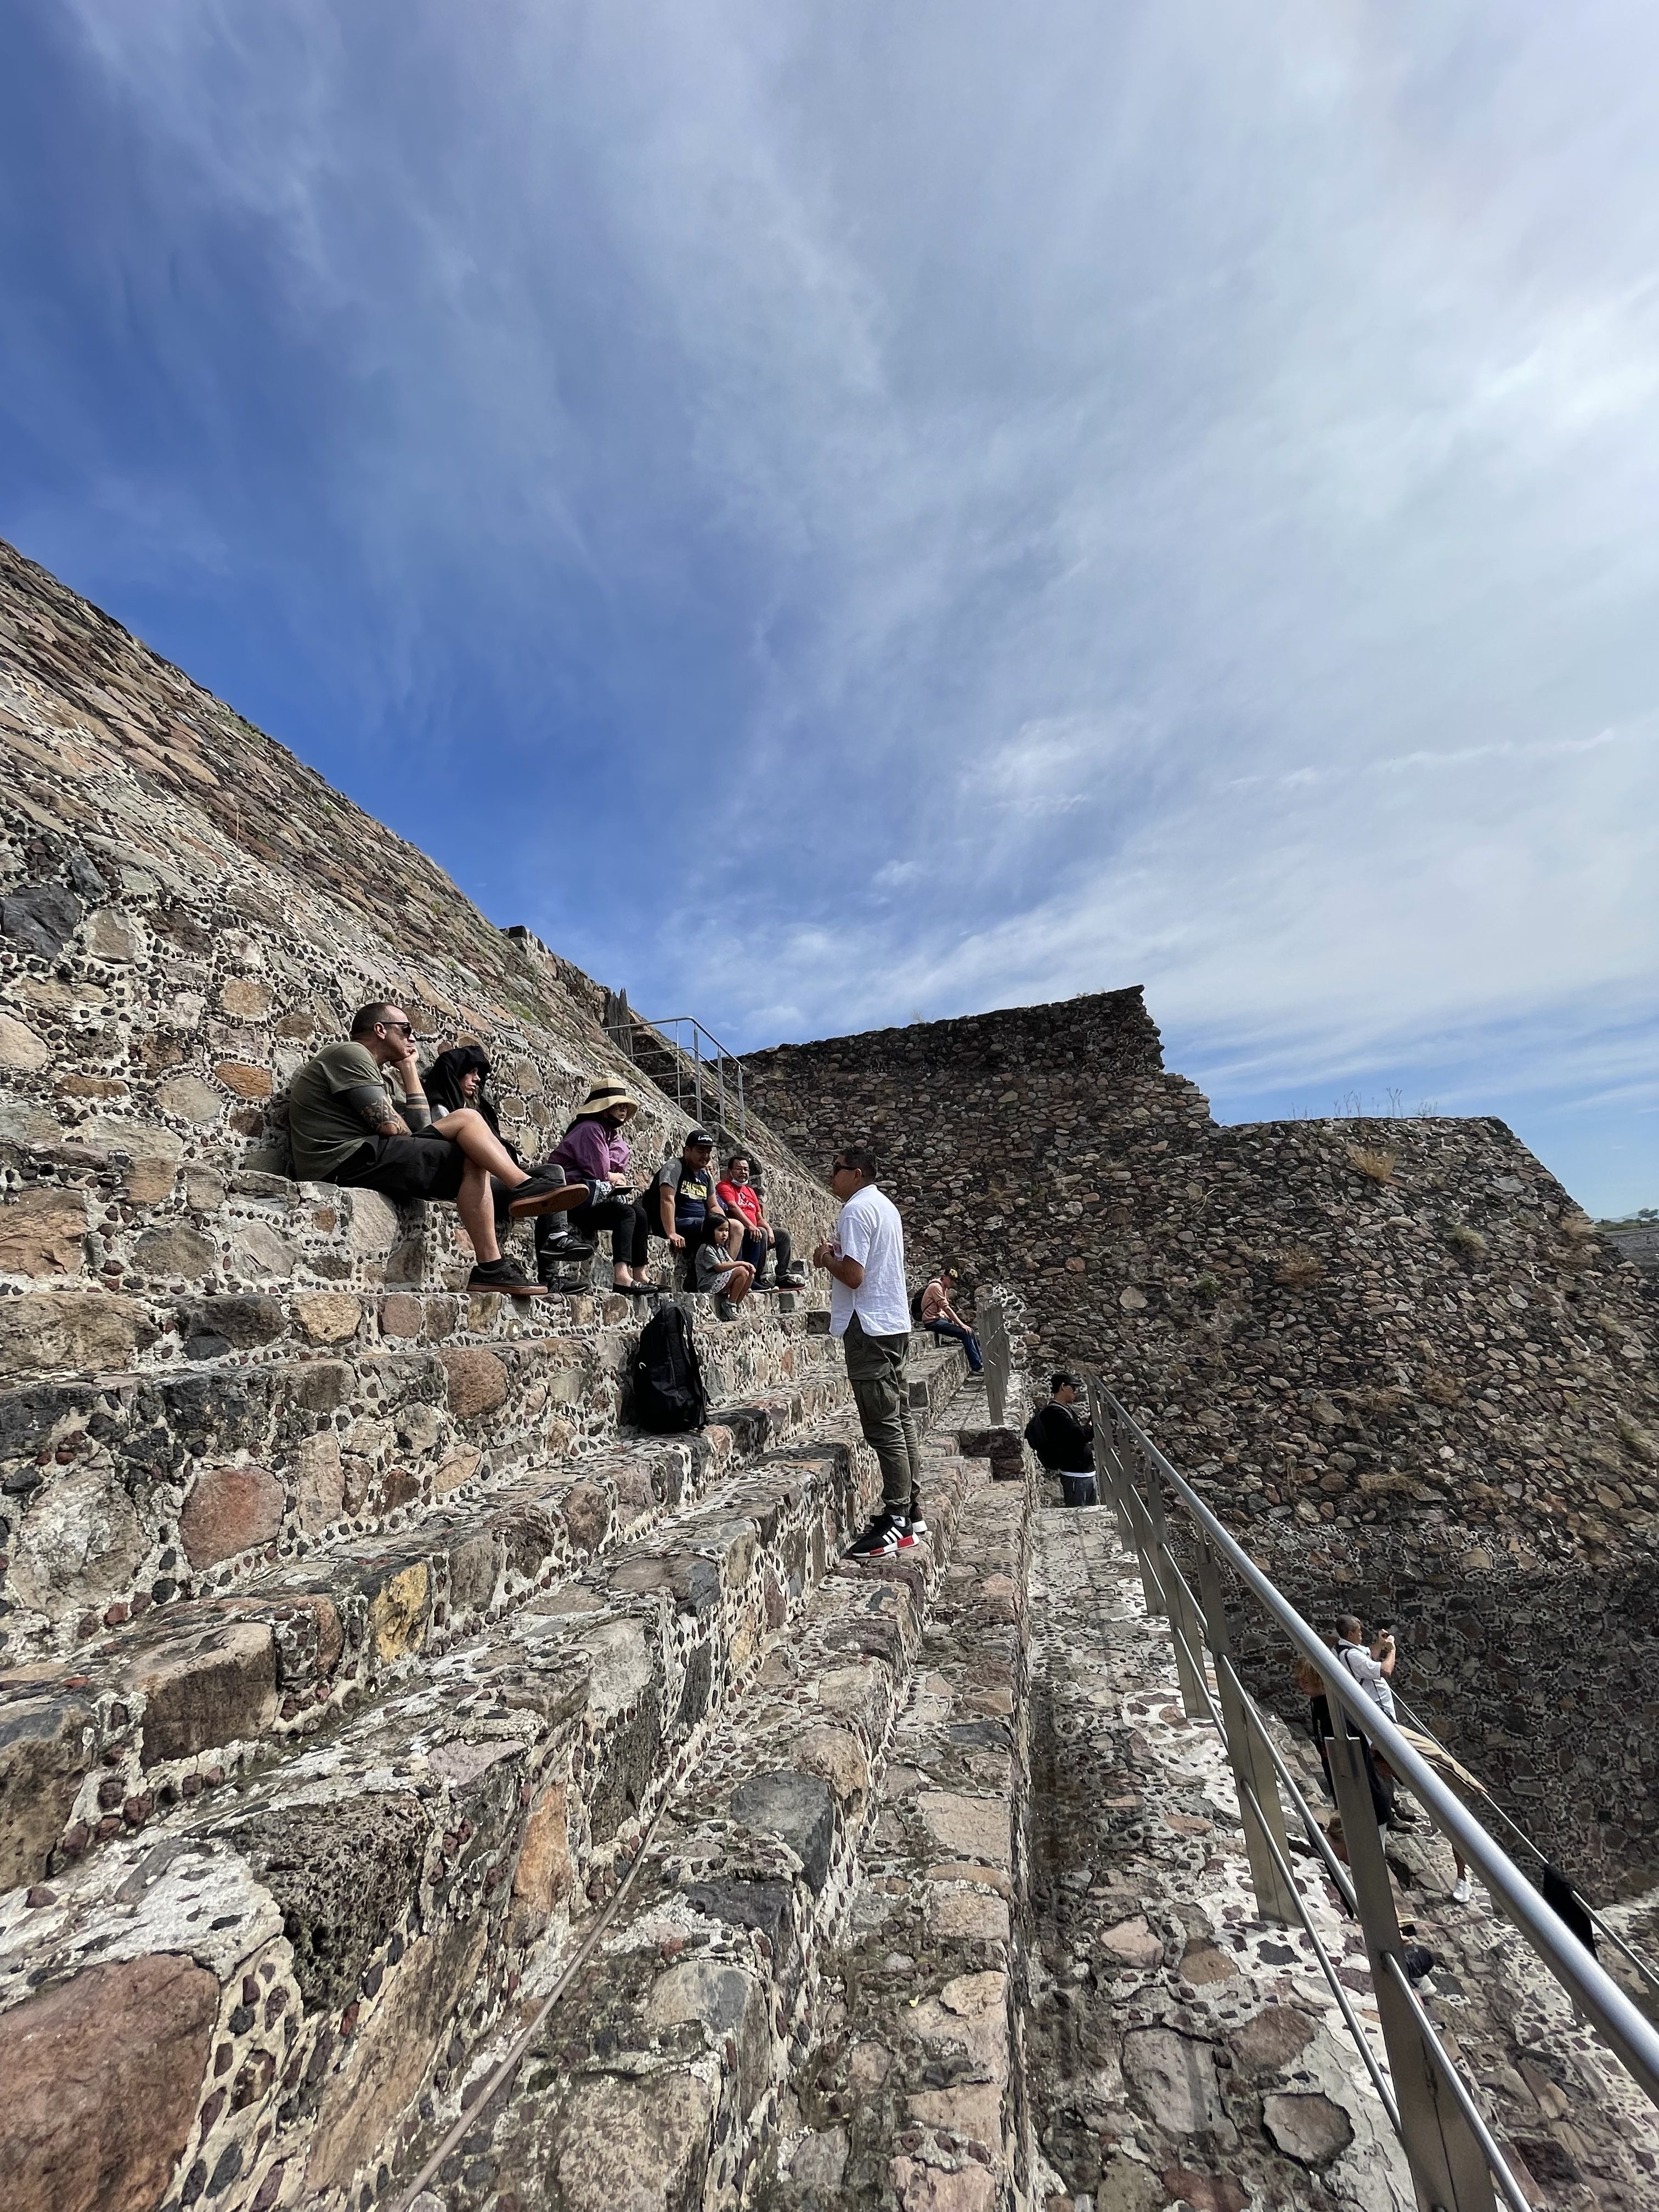 A tour groups listens to their guide as they face the Temple of Quetzalcoatl